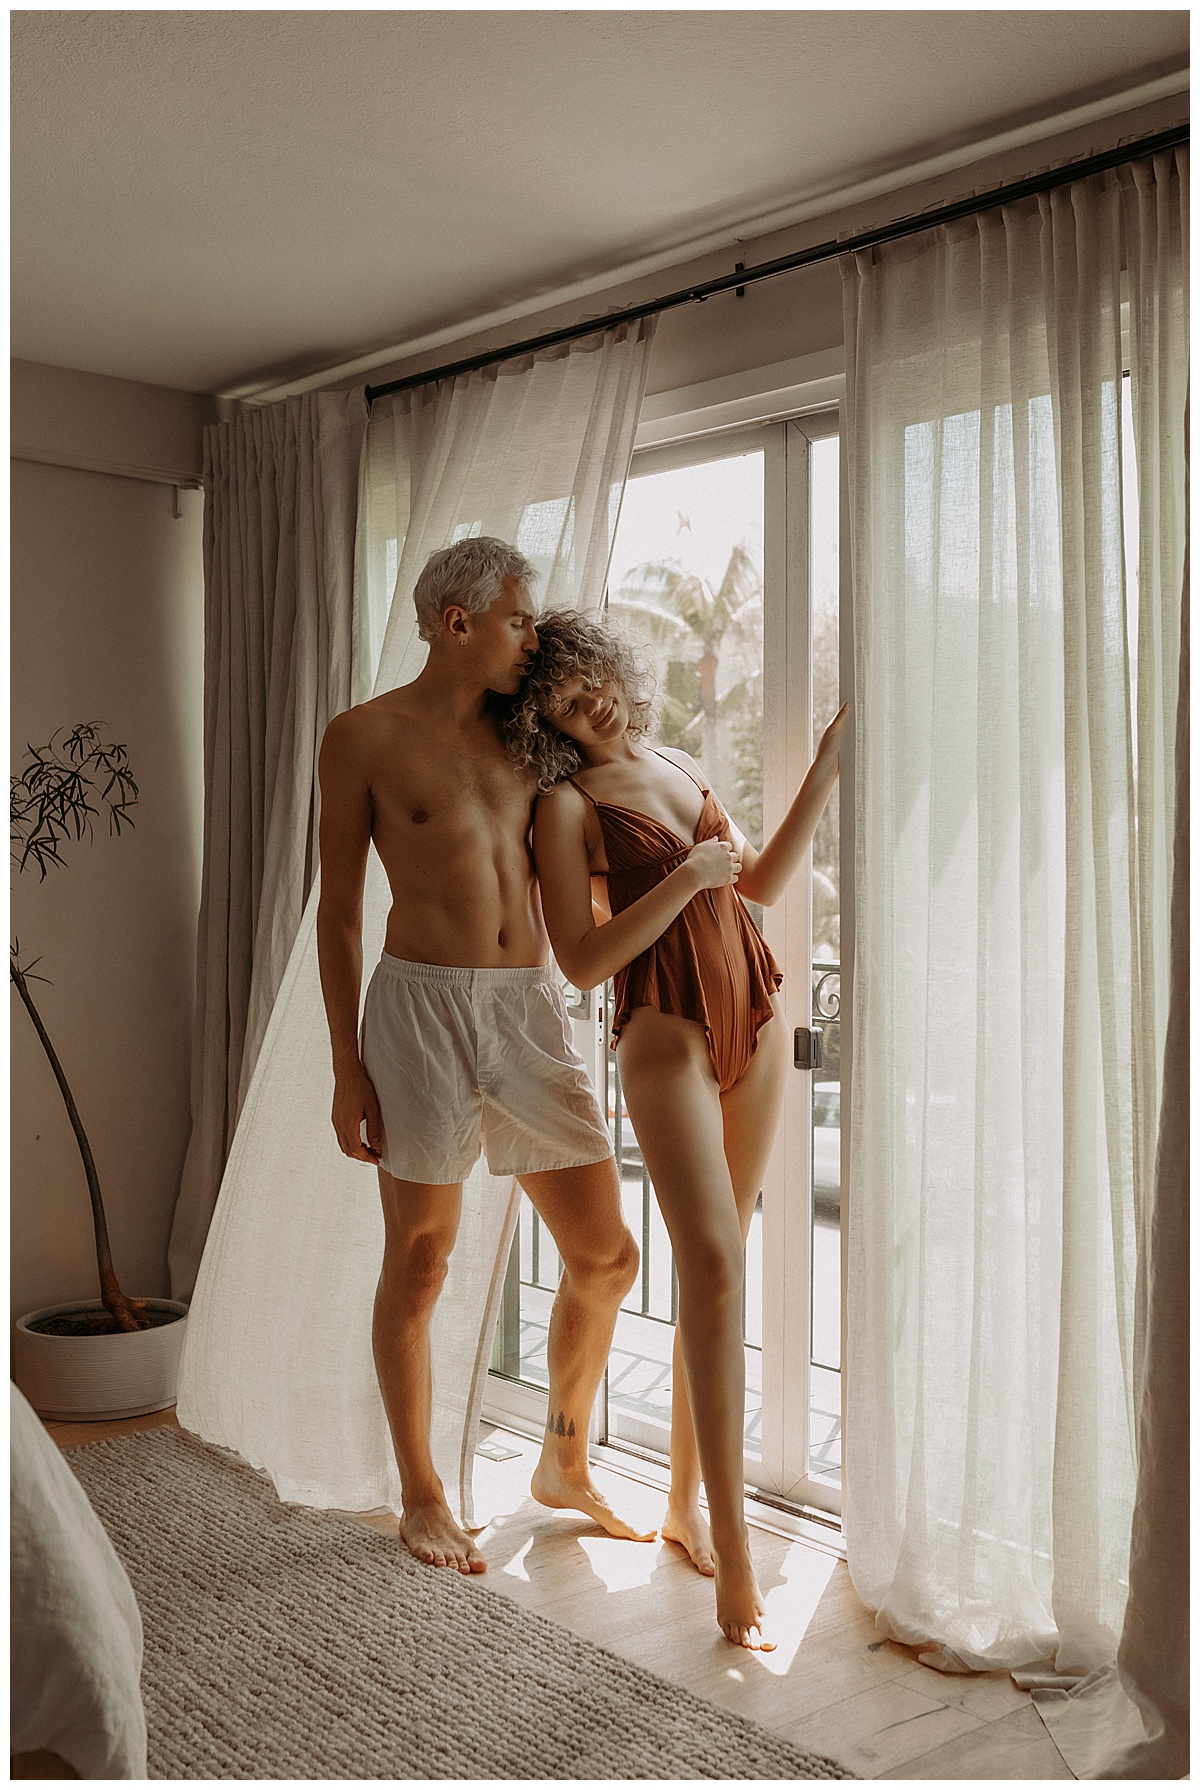 Man and woman stand together in front of window together for Couples Boudoir Session 